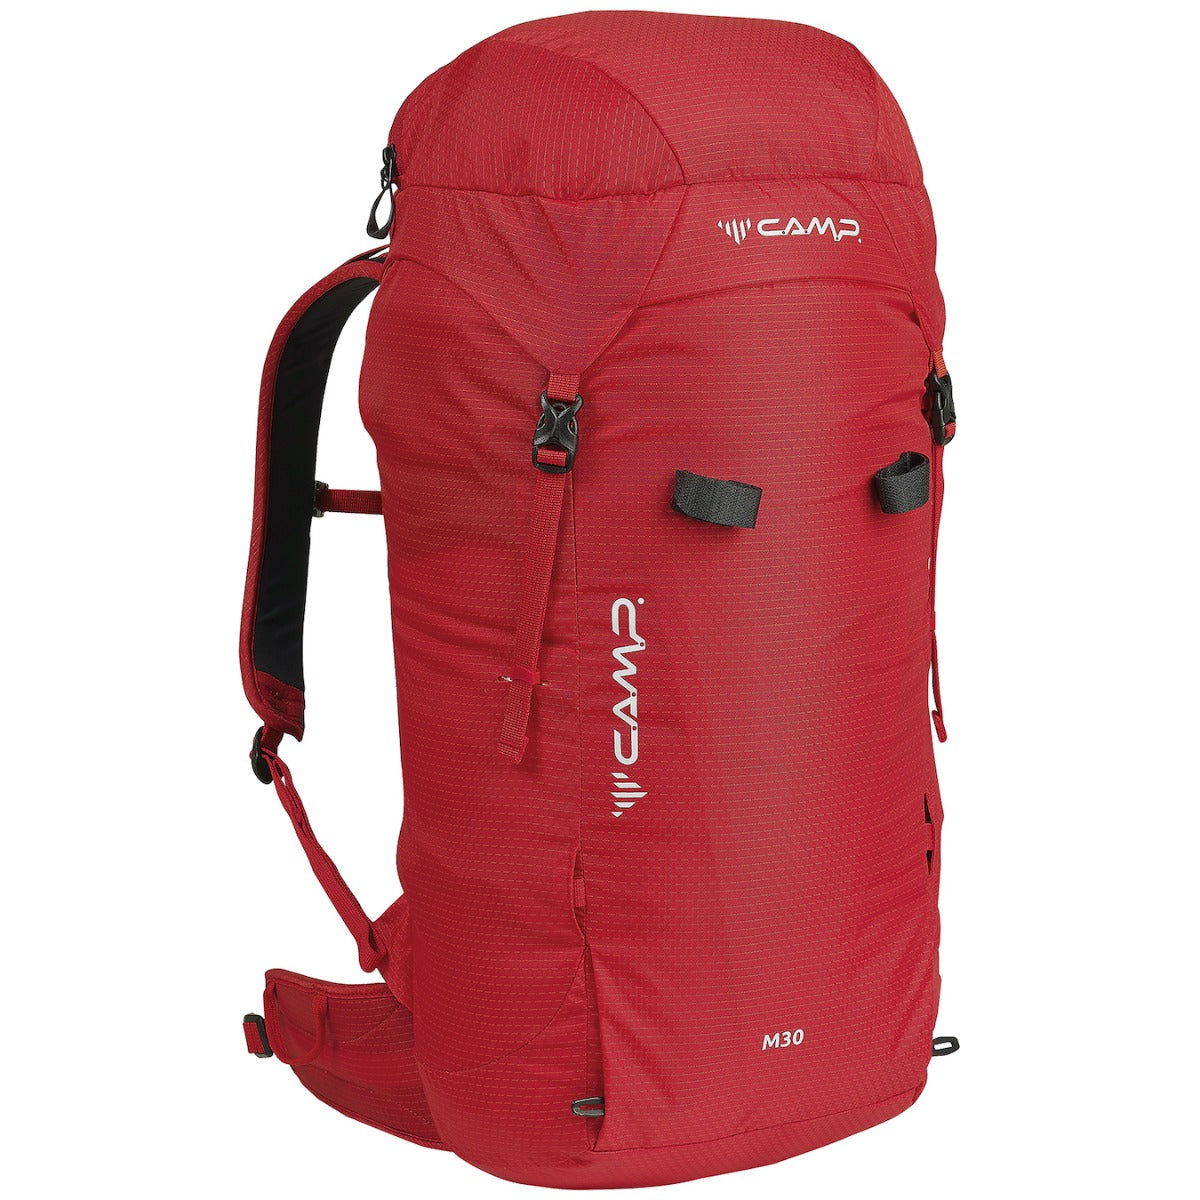 CAMP M30 Technical Climbing Backpack